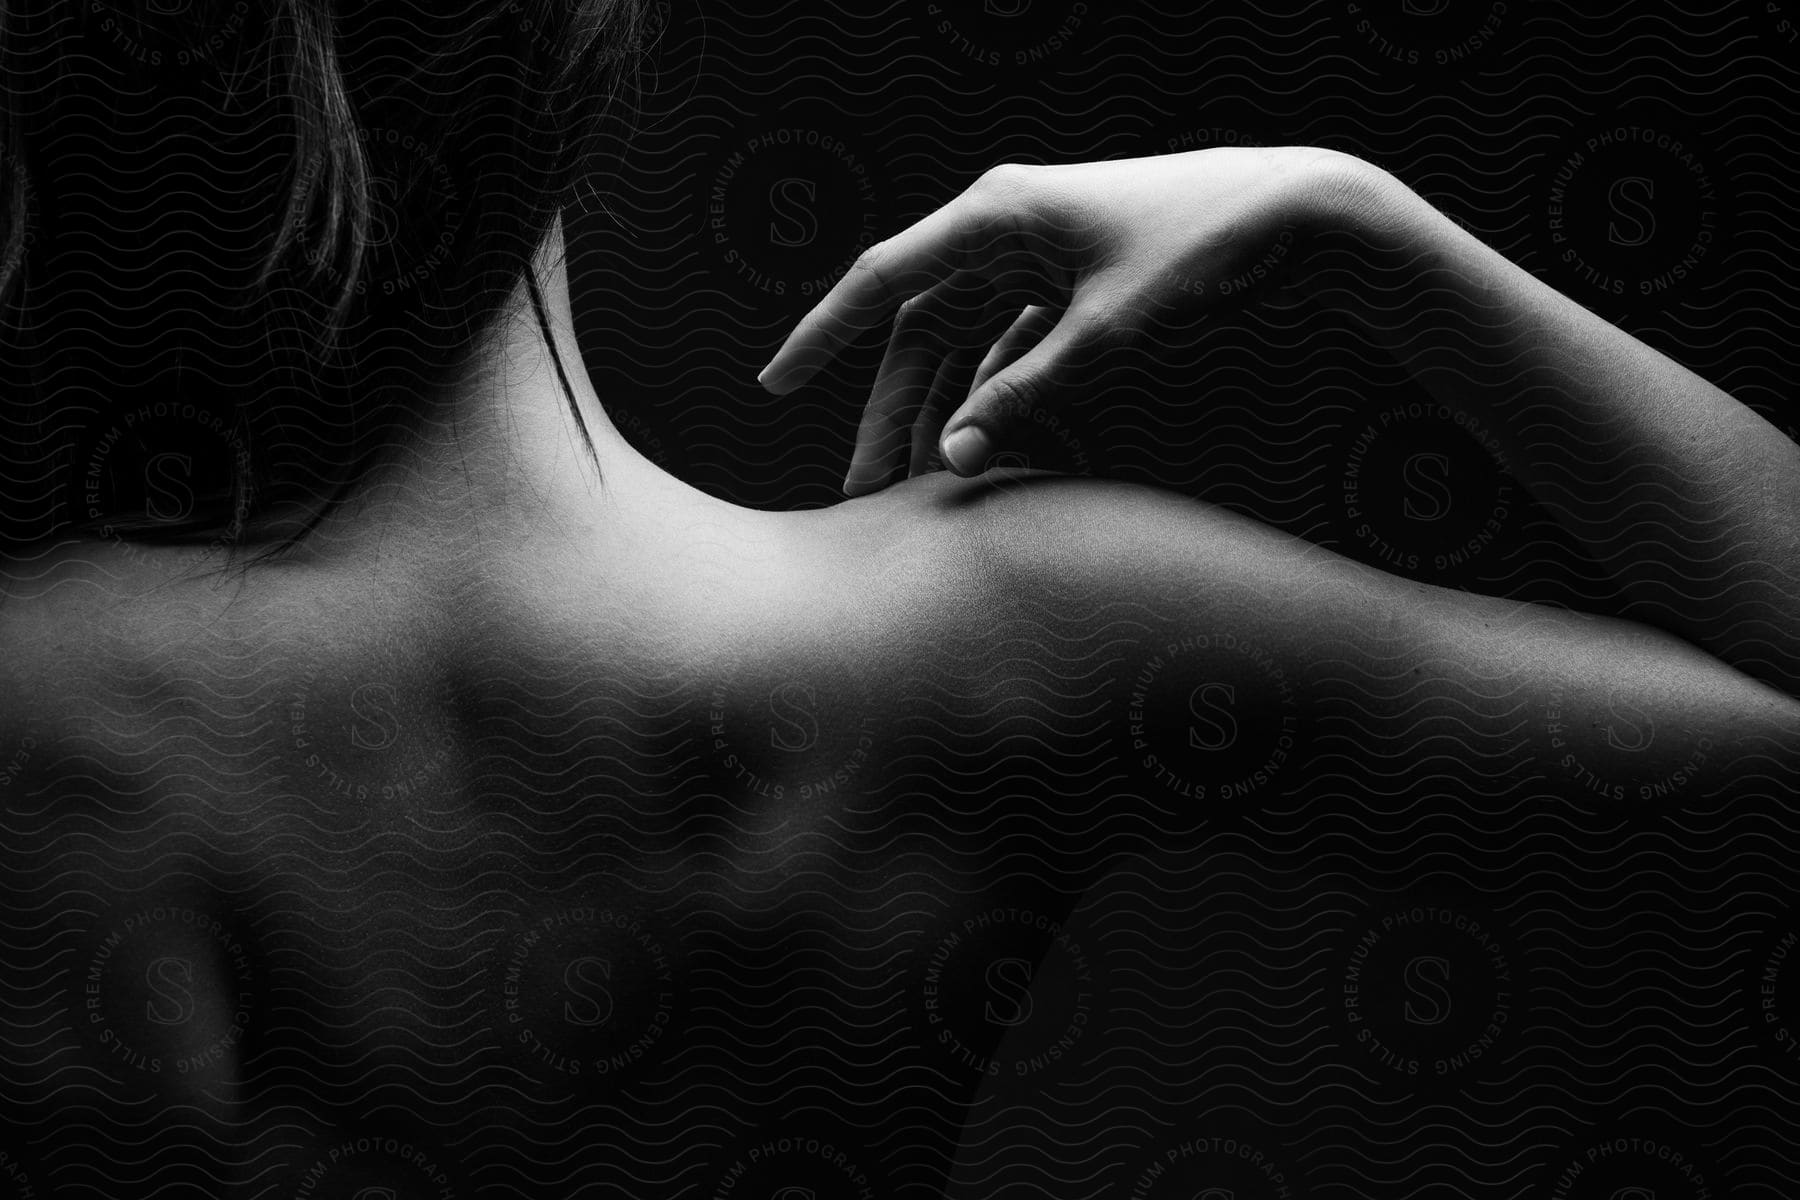 A womans shoulders hand and arm are visible in a dark room